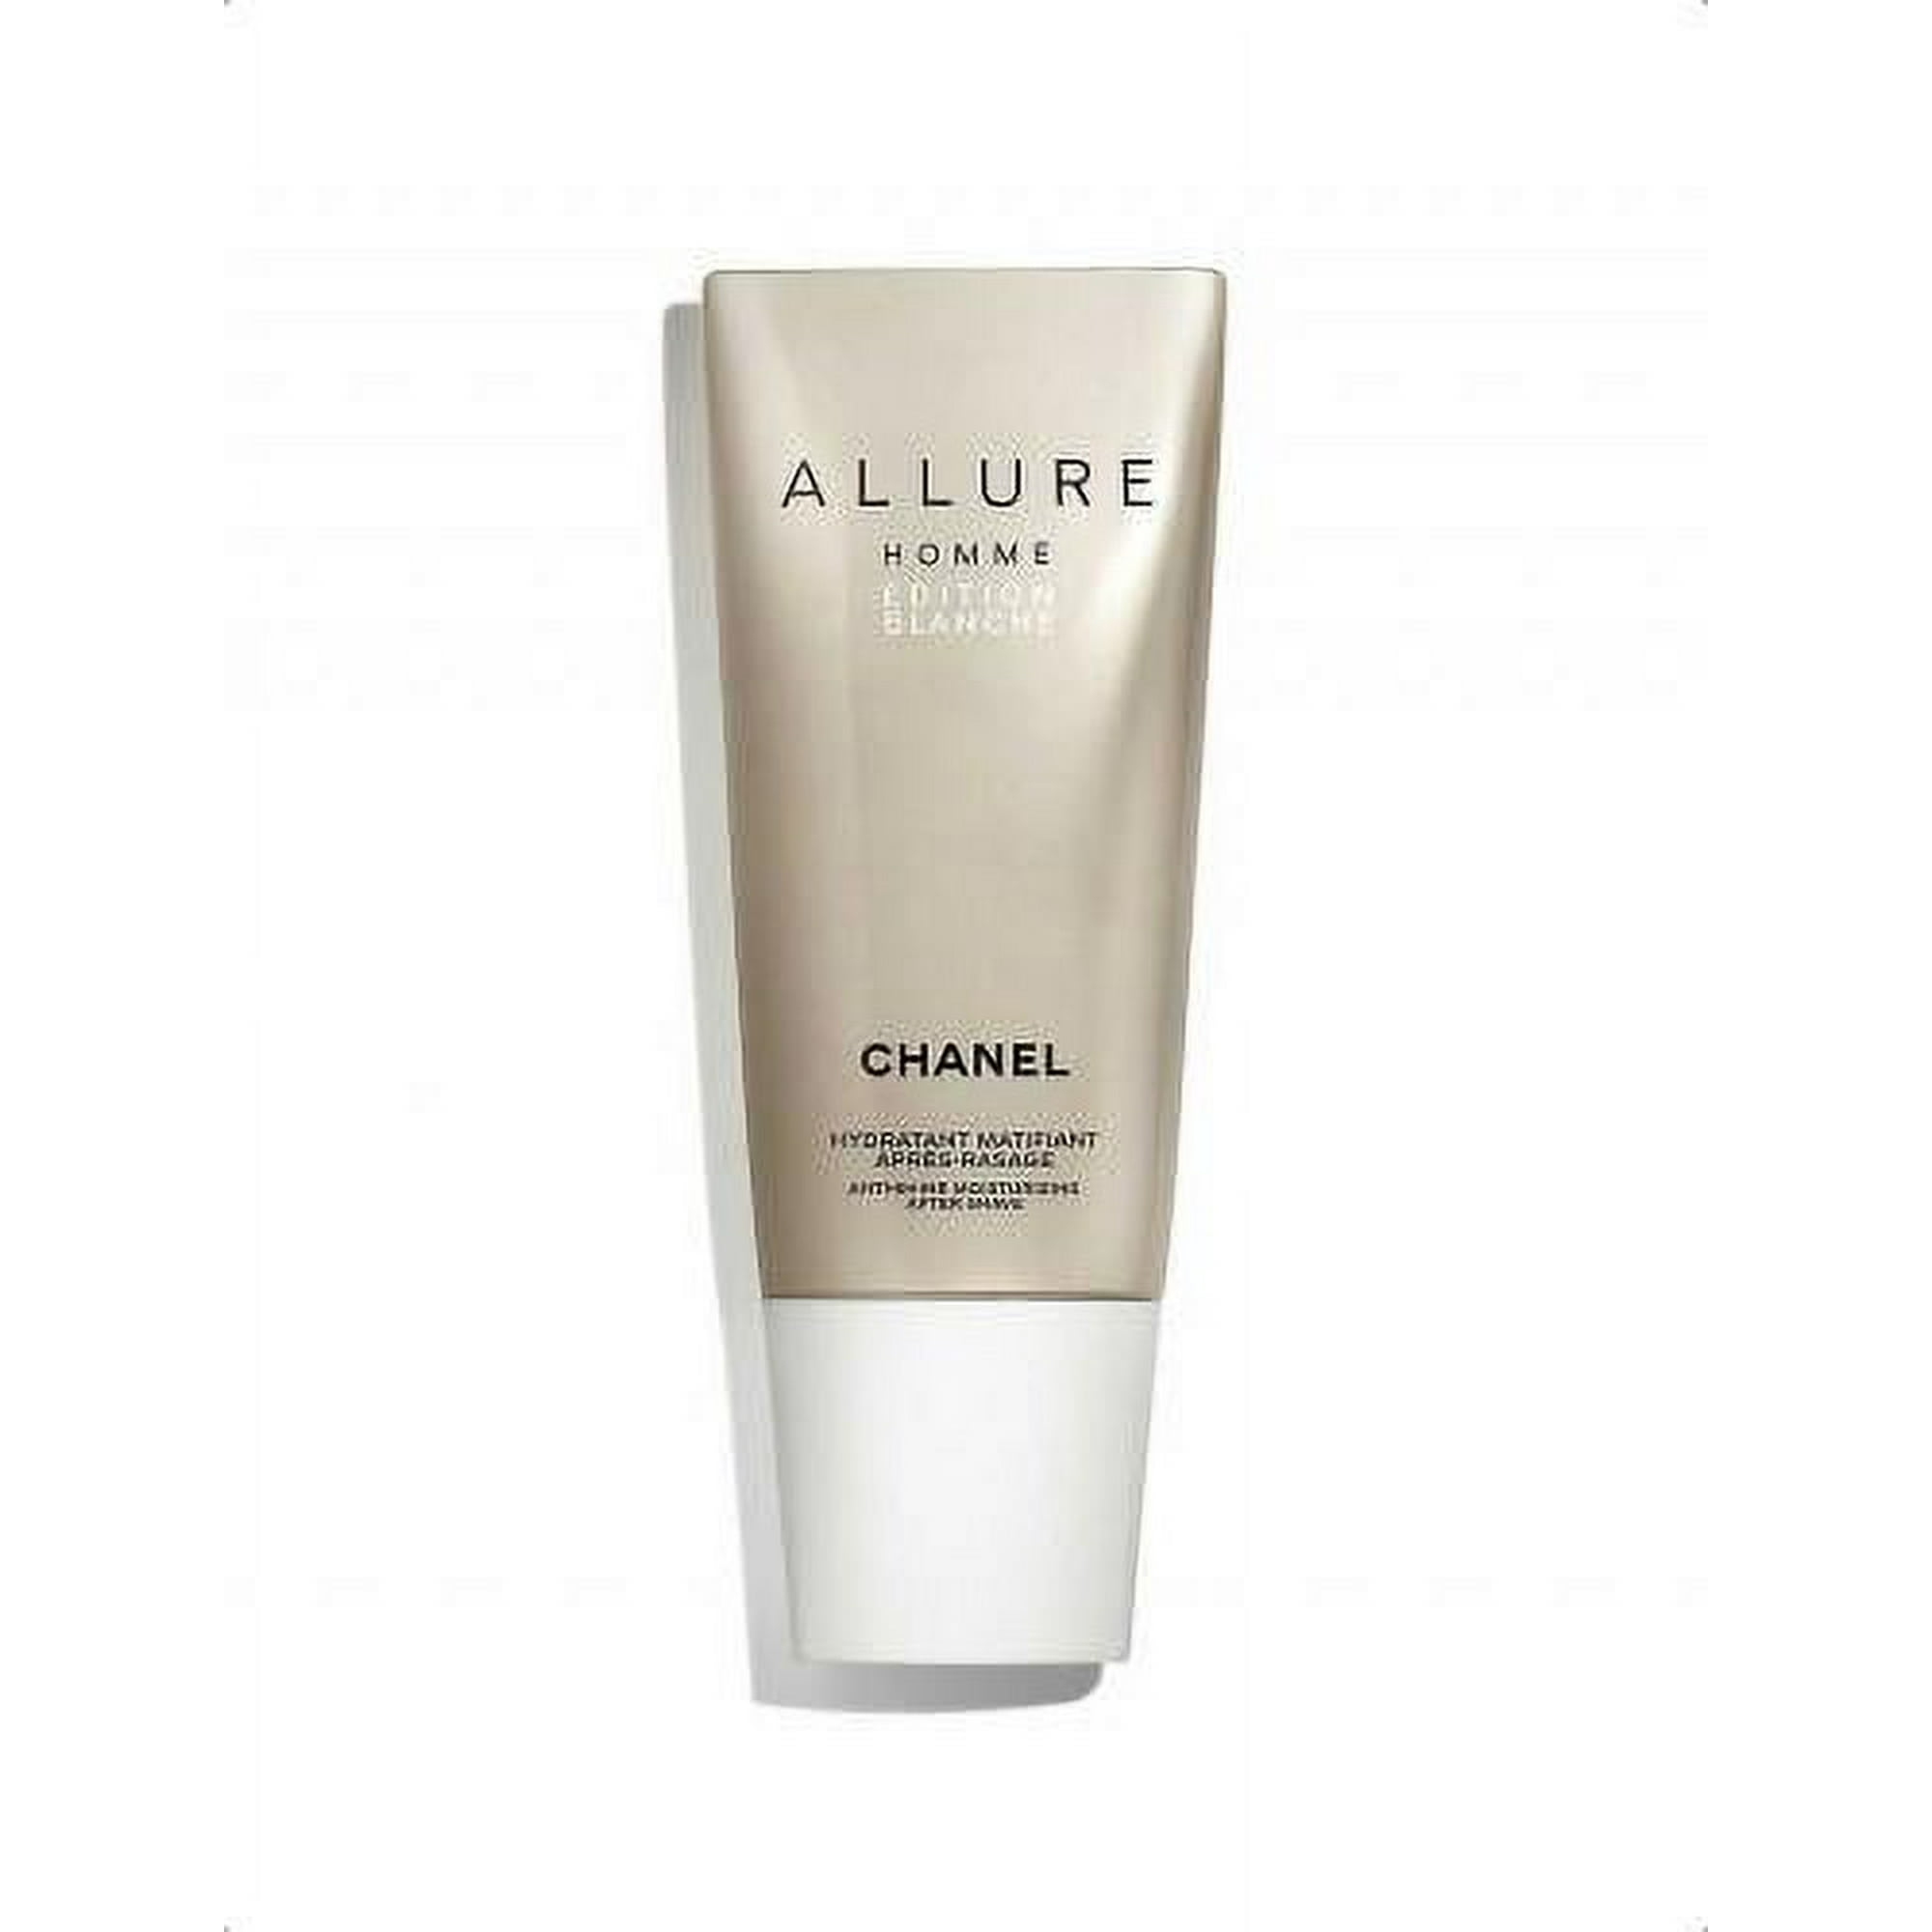 CHANEL ALLURE HOMME EDITION BLANCHE 3.4 AFTER SHAVE CREAM 